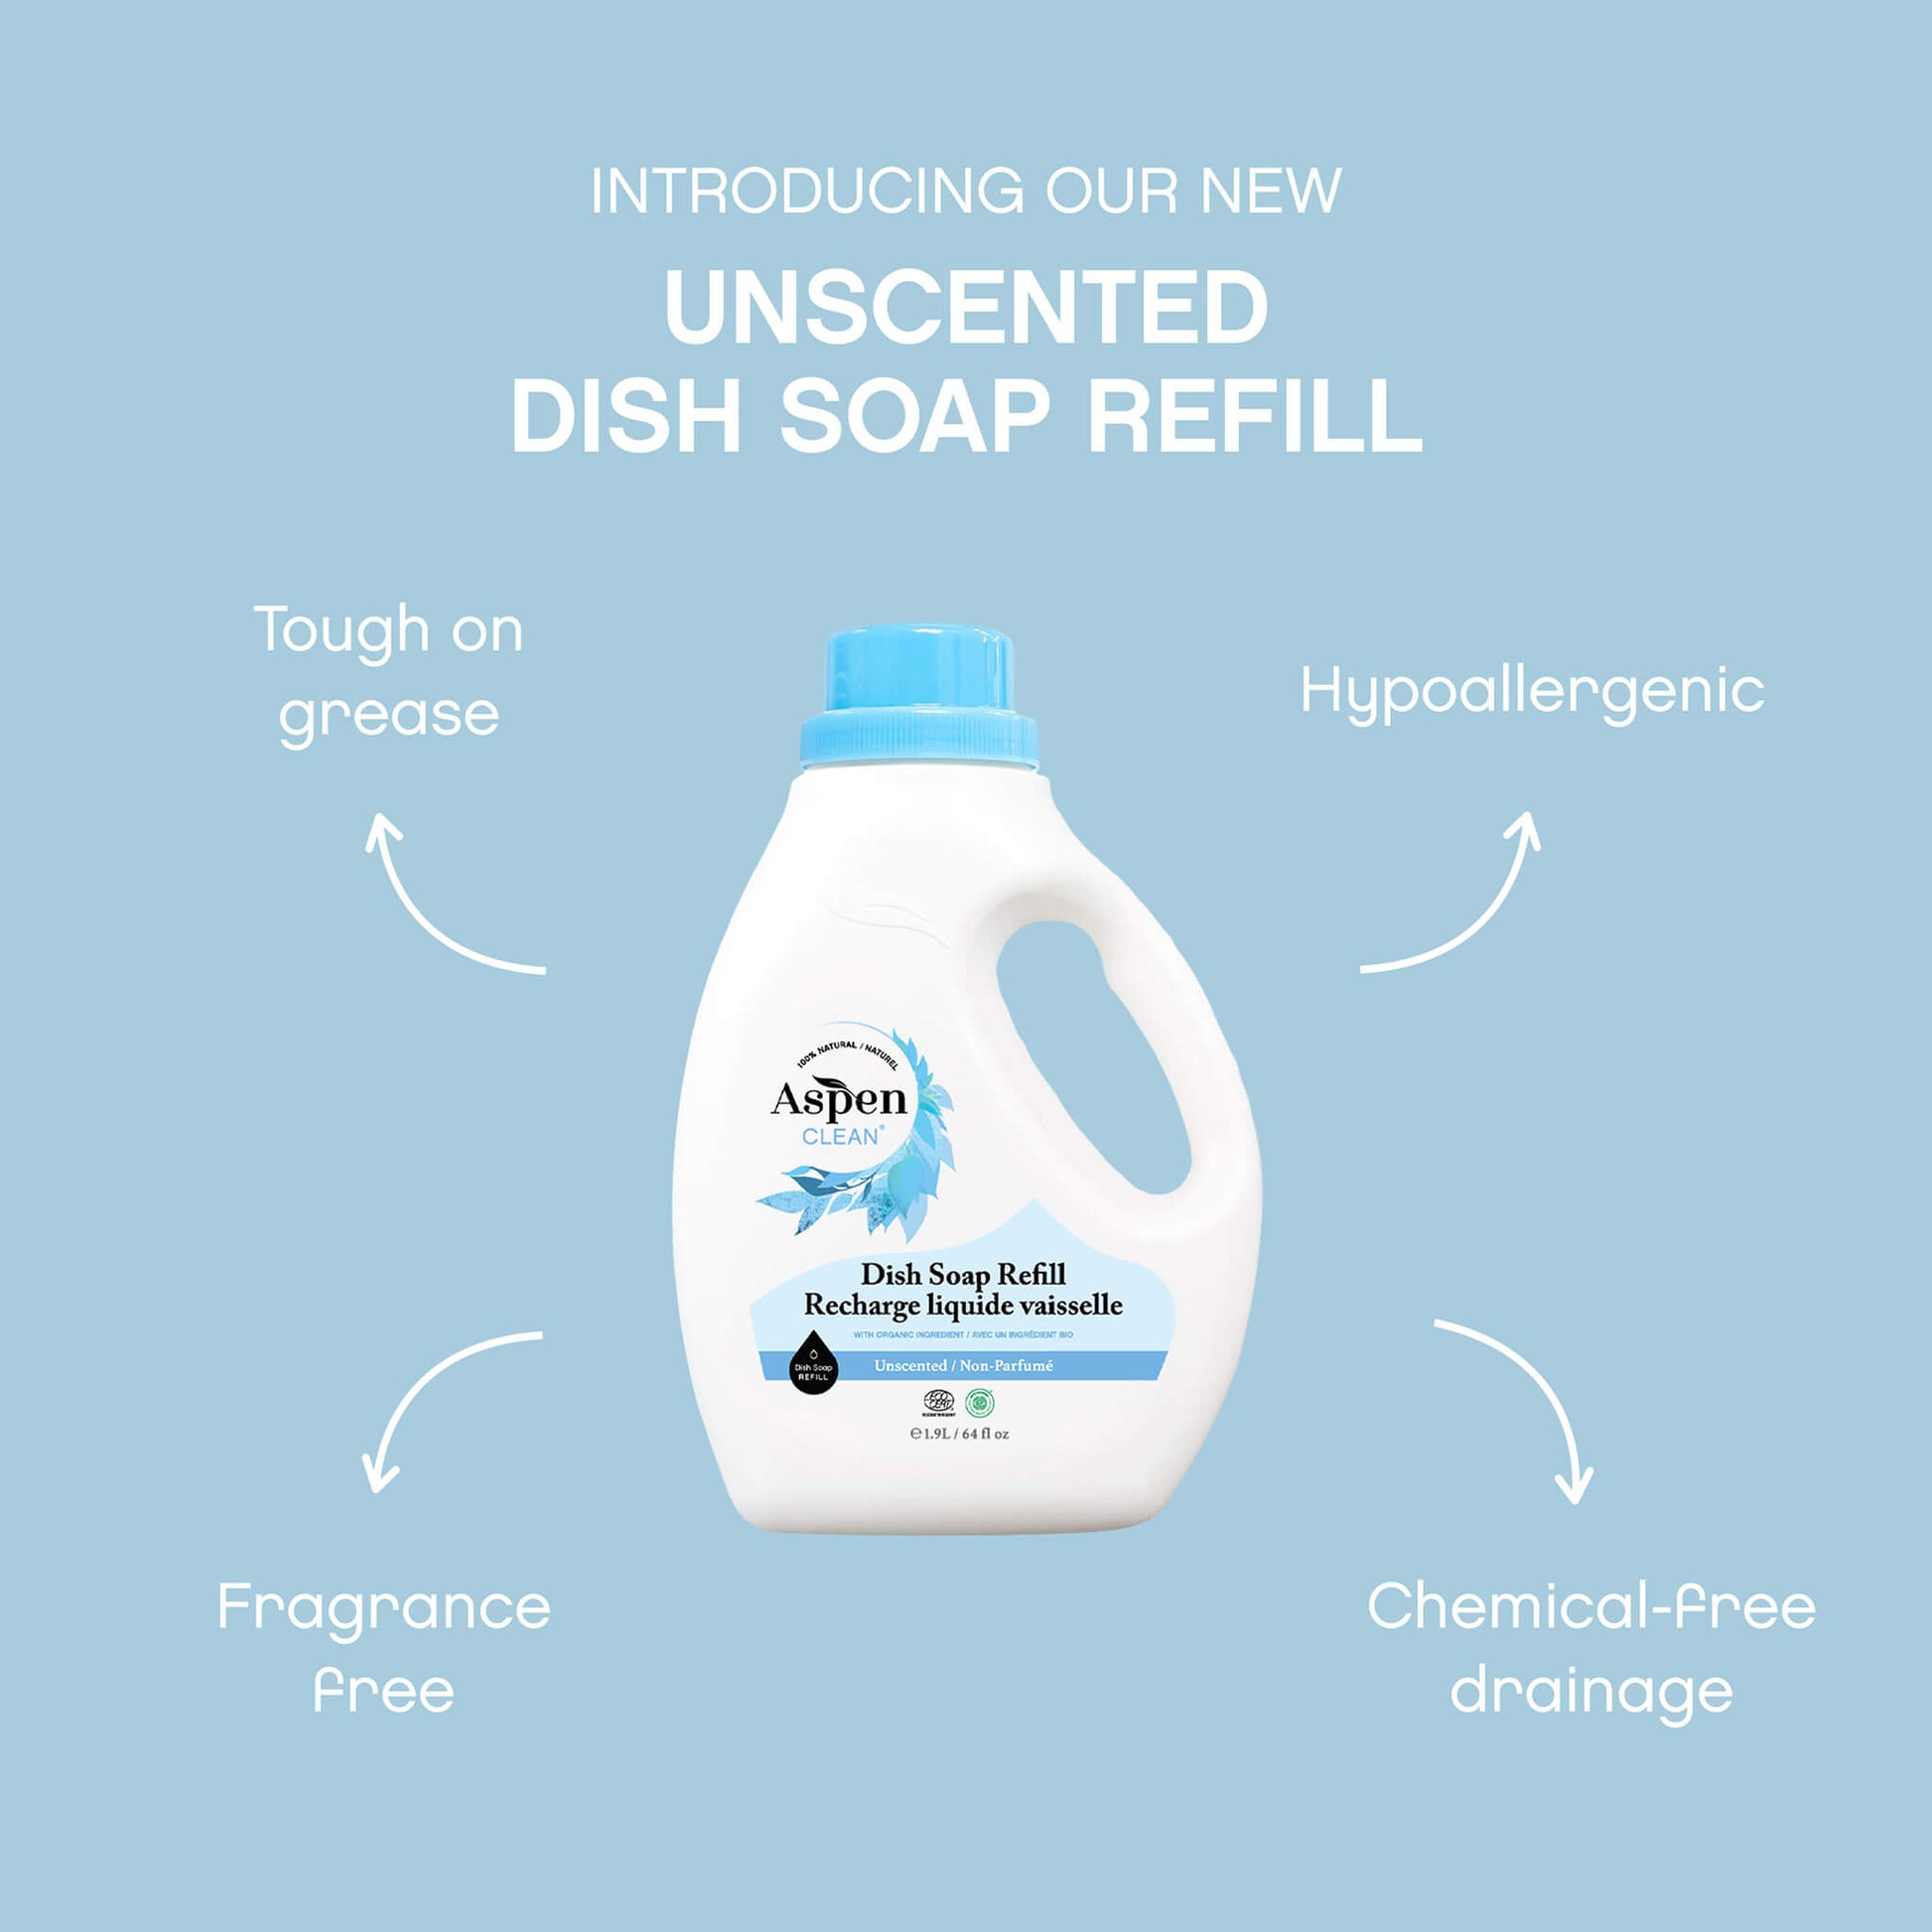 AspenClean refill dish soap Unscented is hypoallergenic, chemical-free drainage, and tough on grease.